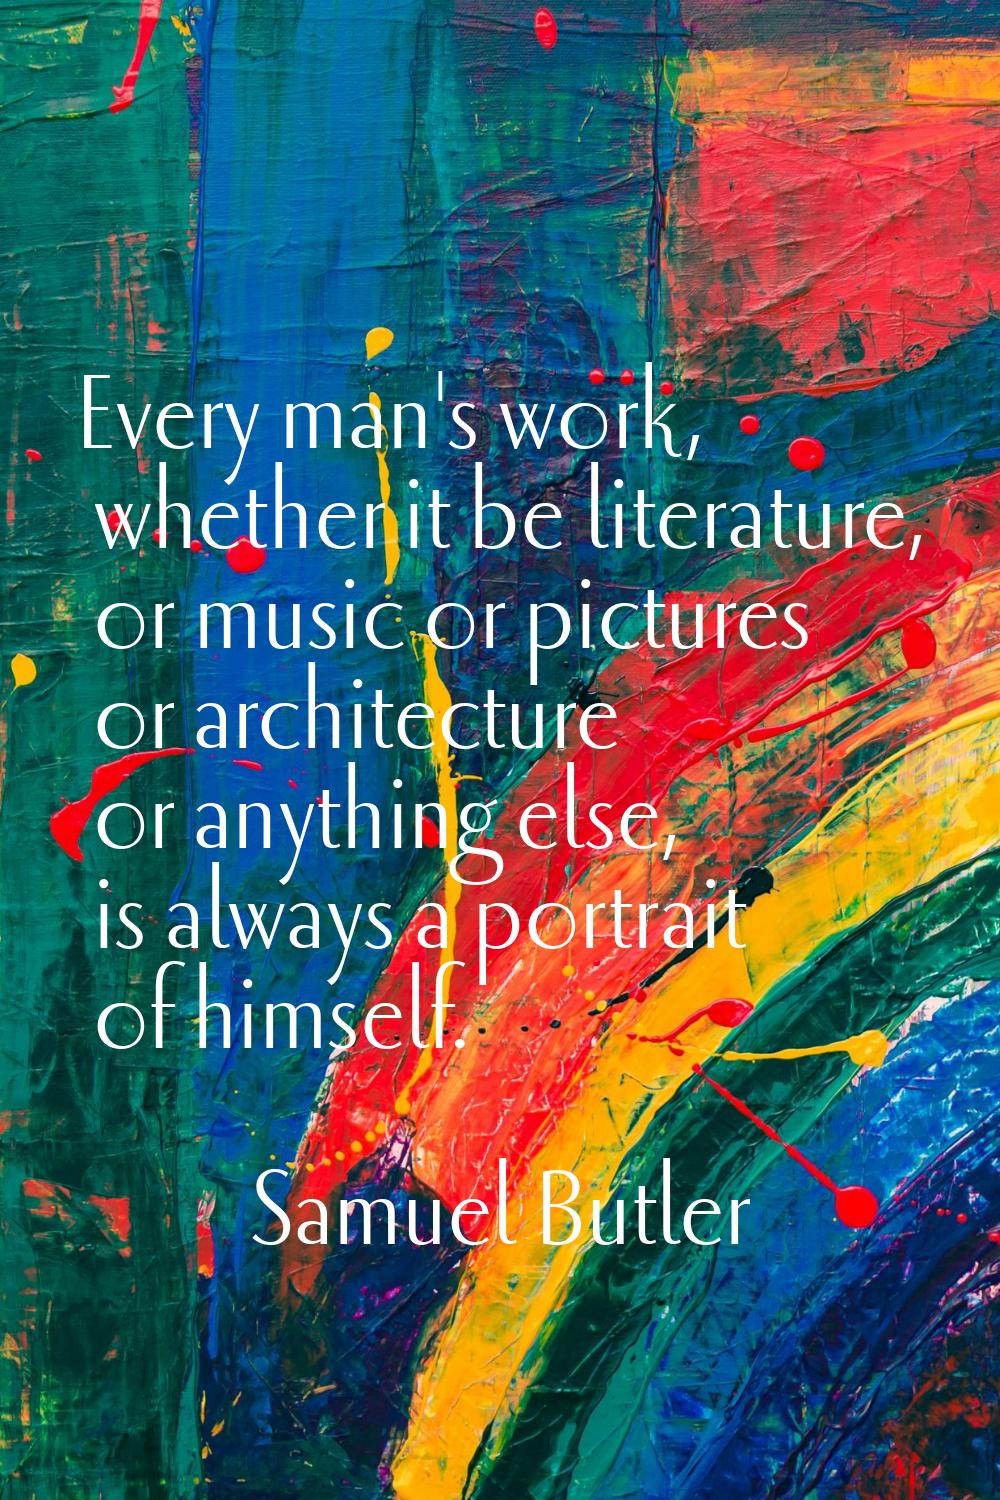 Every man's work, whether it be literature, or music or pictures or architecture or anything else, 